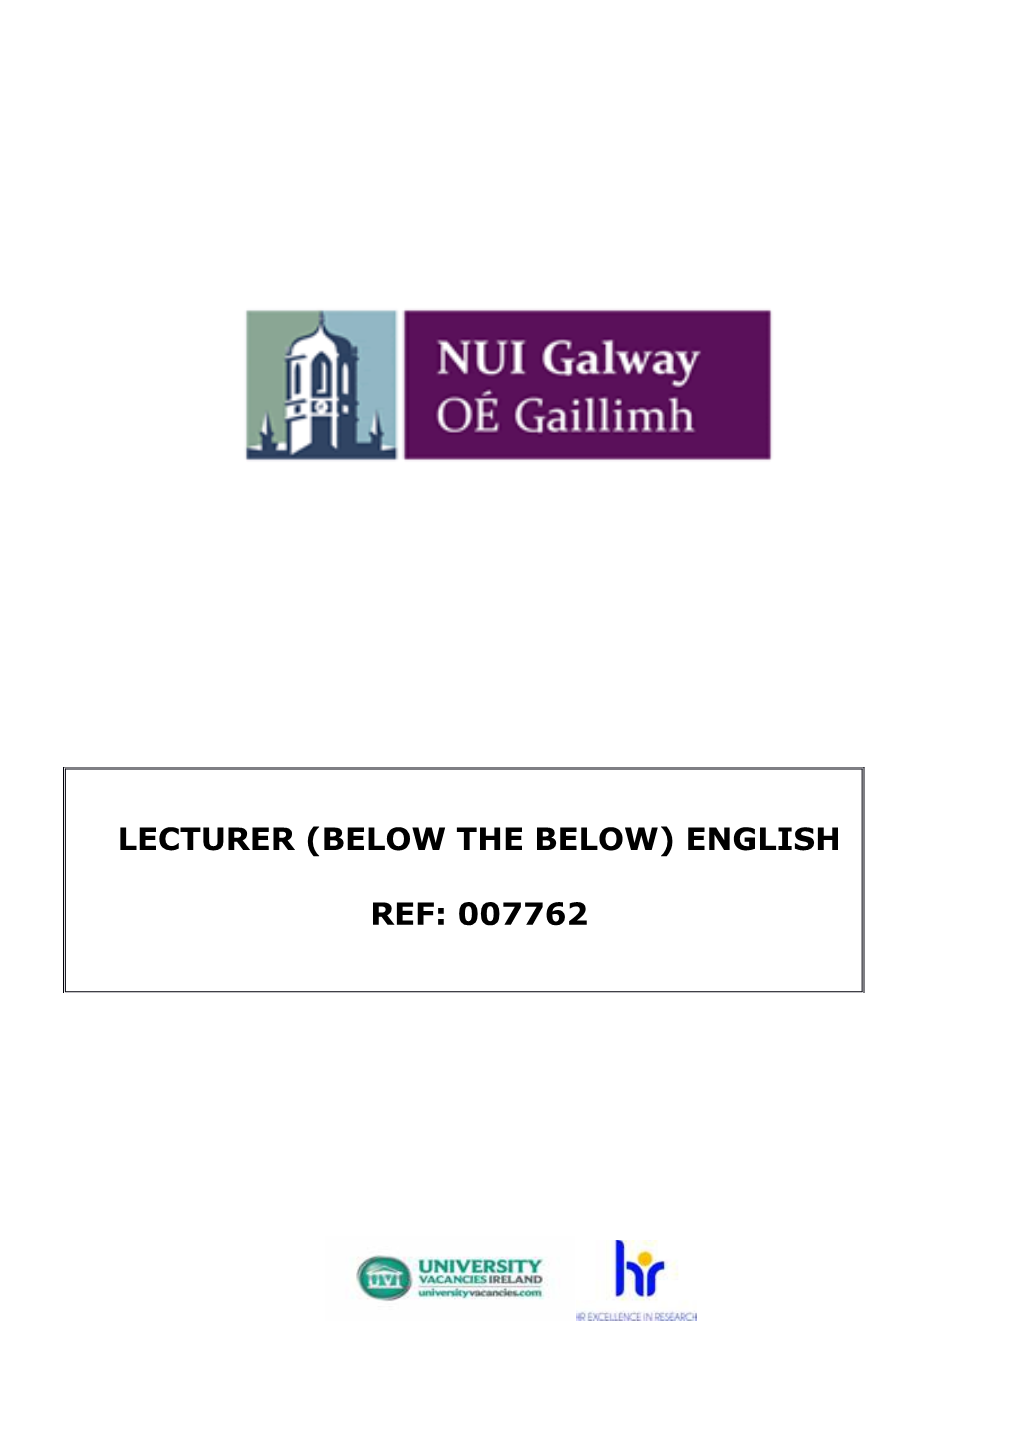 Competency Framework for Lecturer Roles at NUIG7